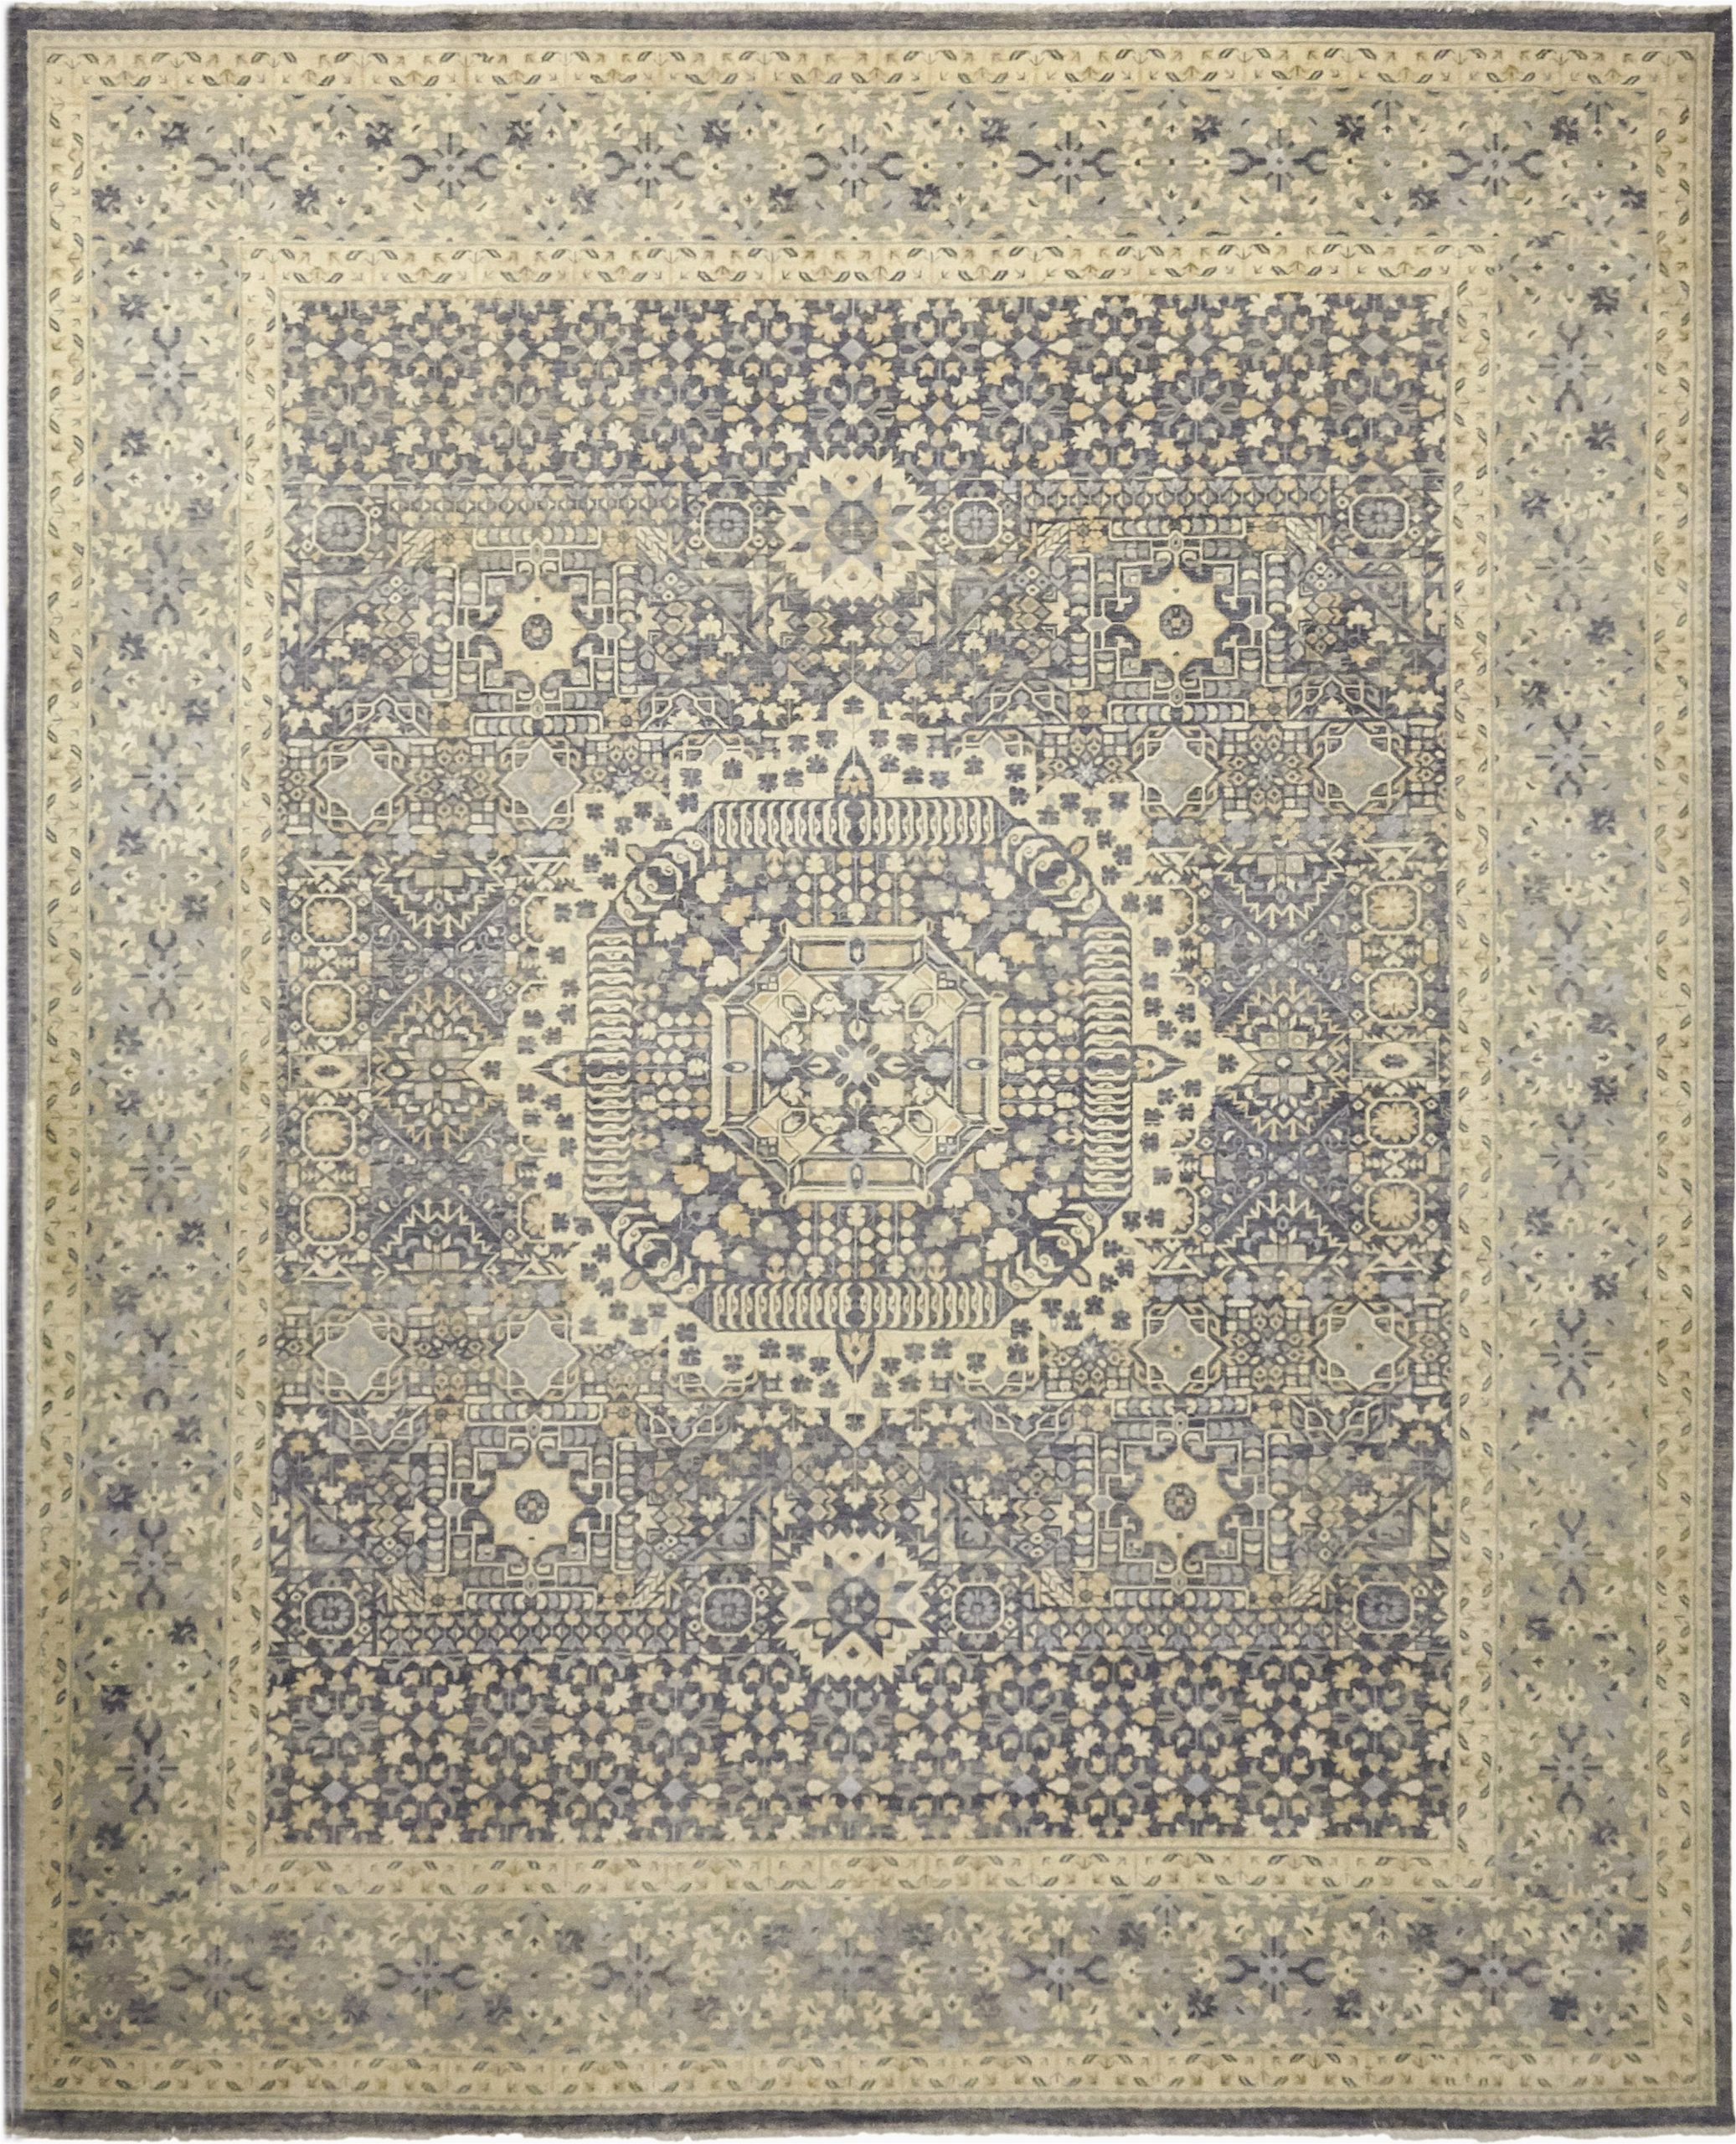 12 X 14 area Rugs Cheap solo Rugs Oushak E Of A Kind Hand Knotted Wool area Rug Parchment 12 X 14